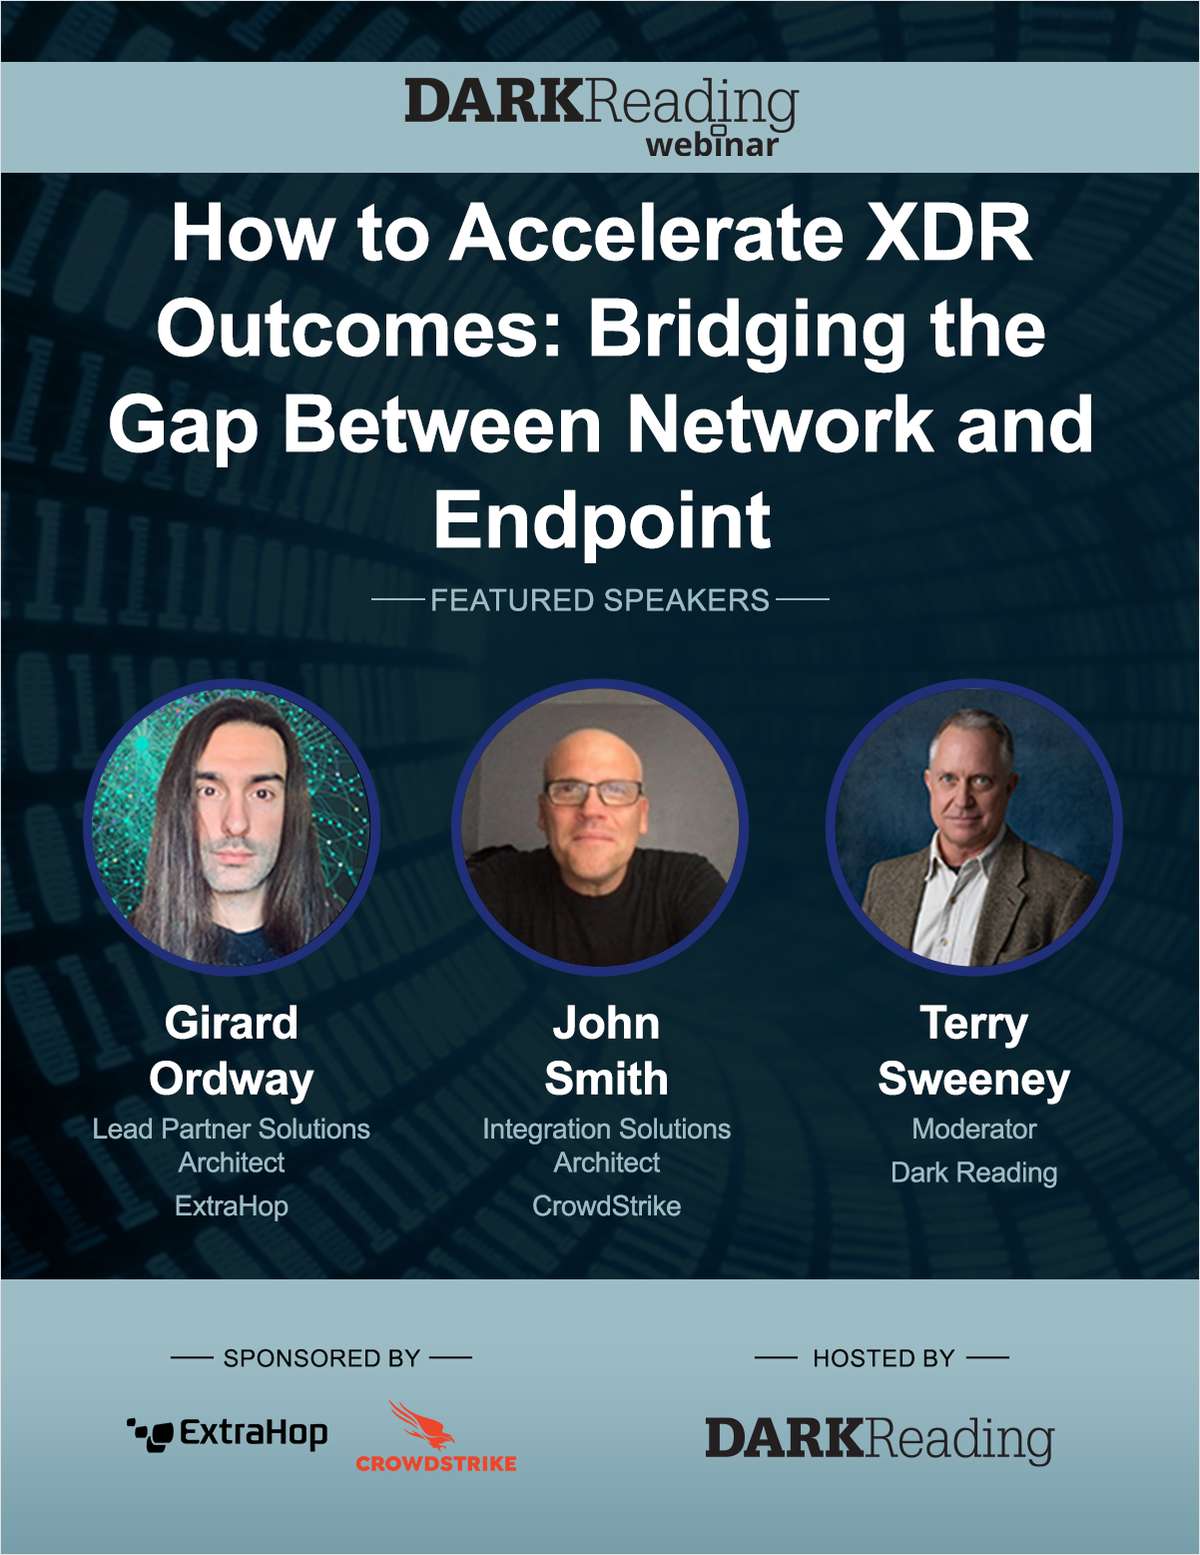 How to Accelerate XDR Outcomes: Bridging the Gap Between Network and Endpoint